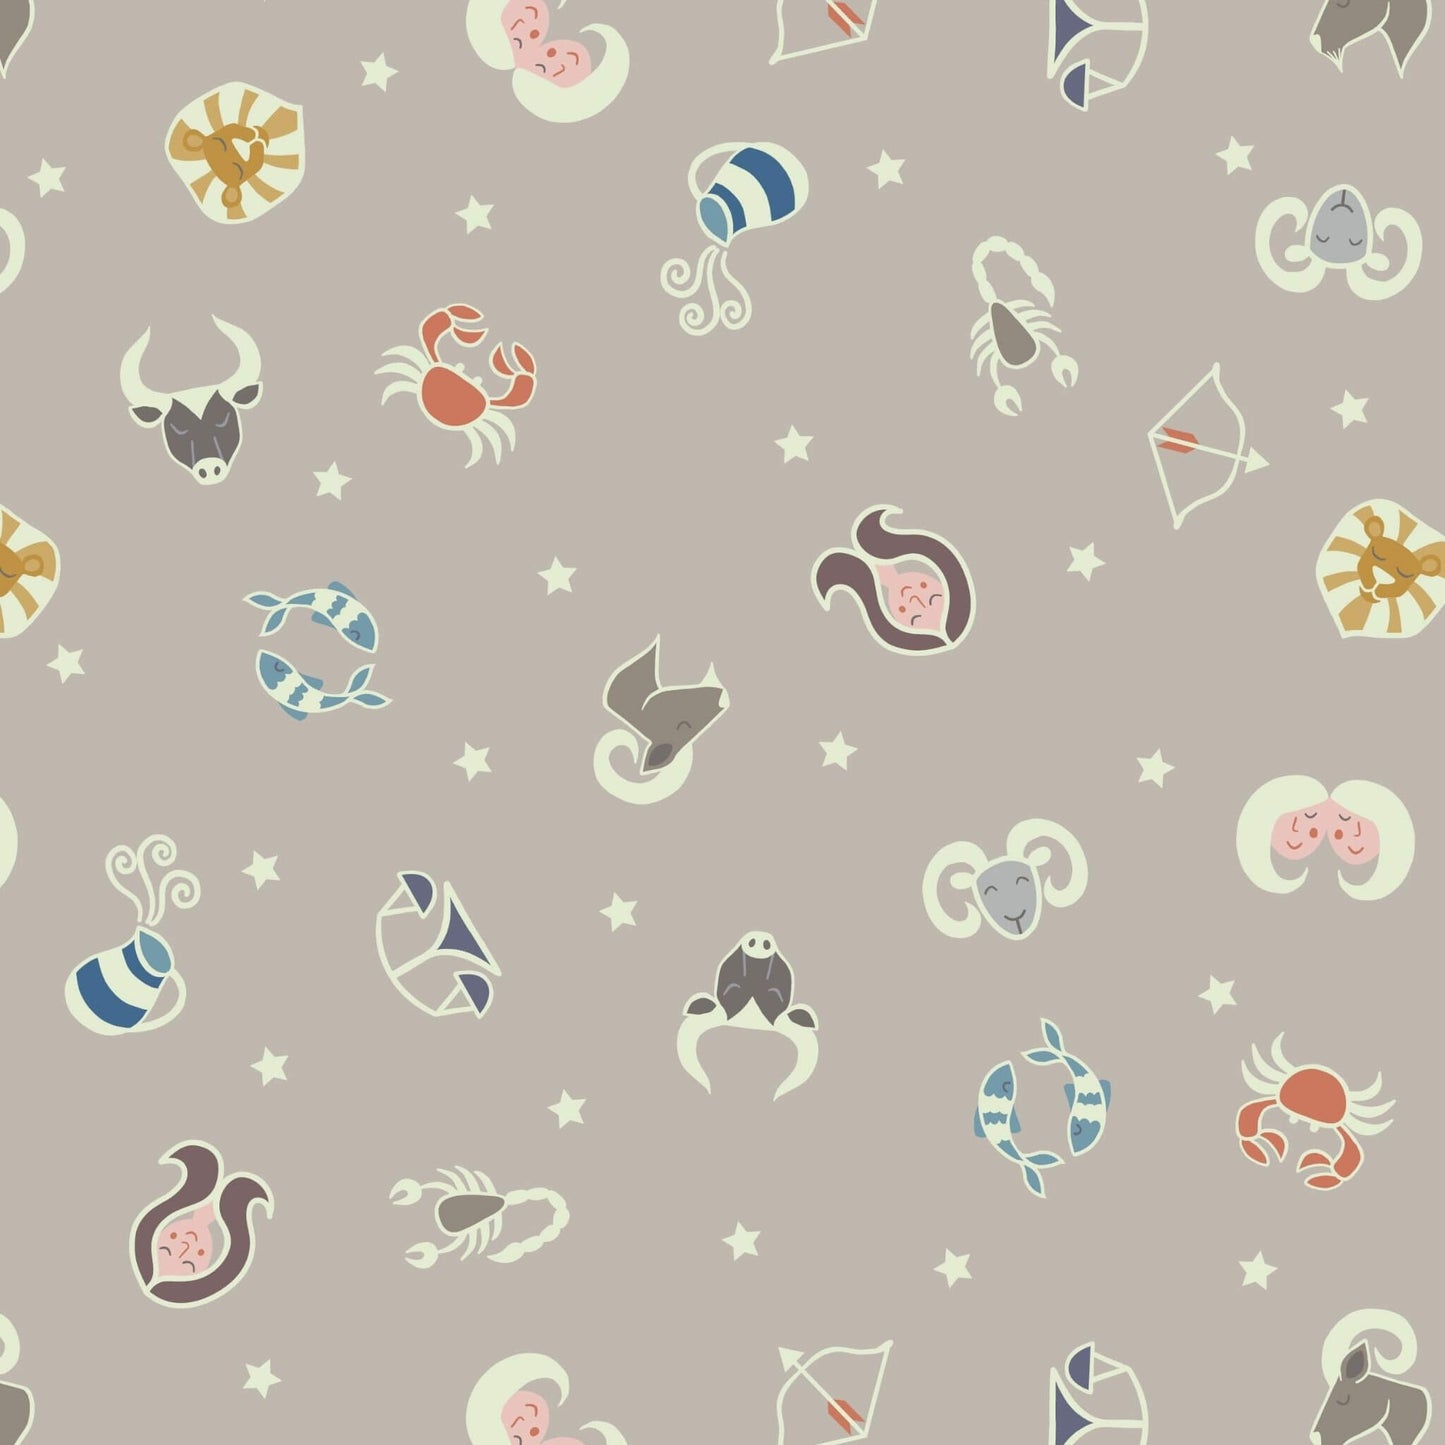 Star Signs - Small Things Glow Fabric Range - Lewis & Irene - Light Clay